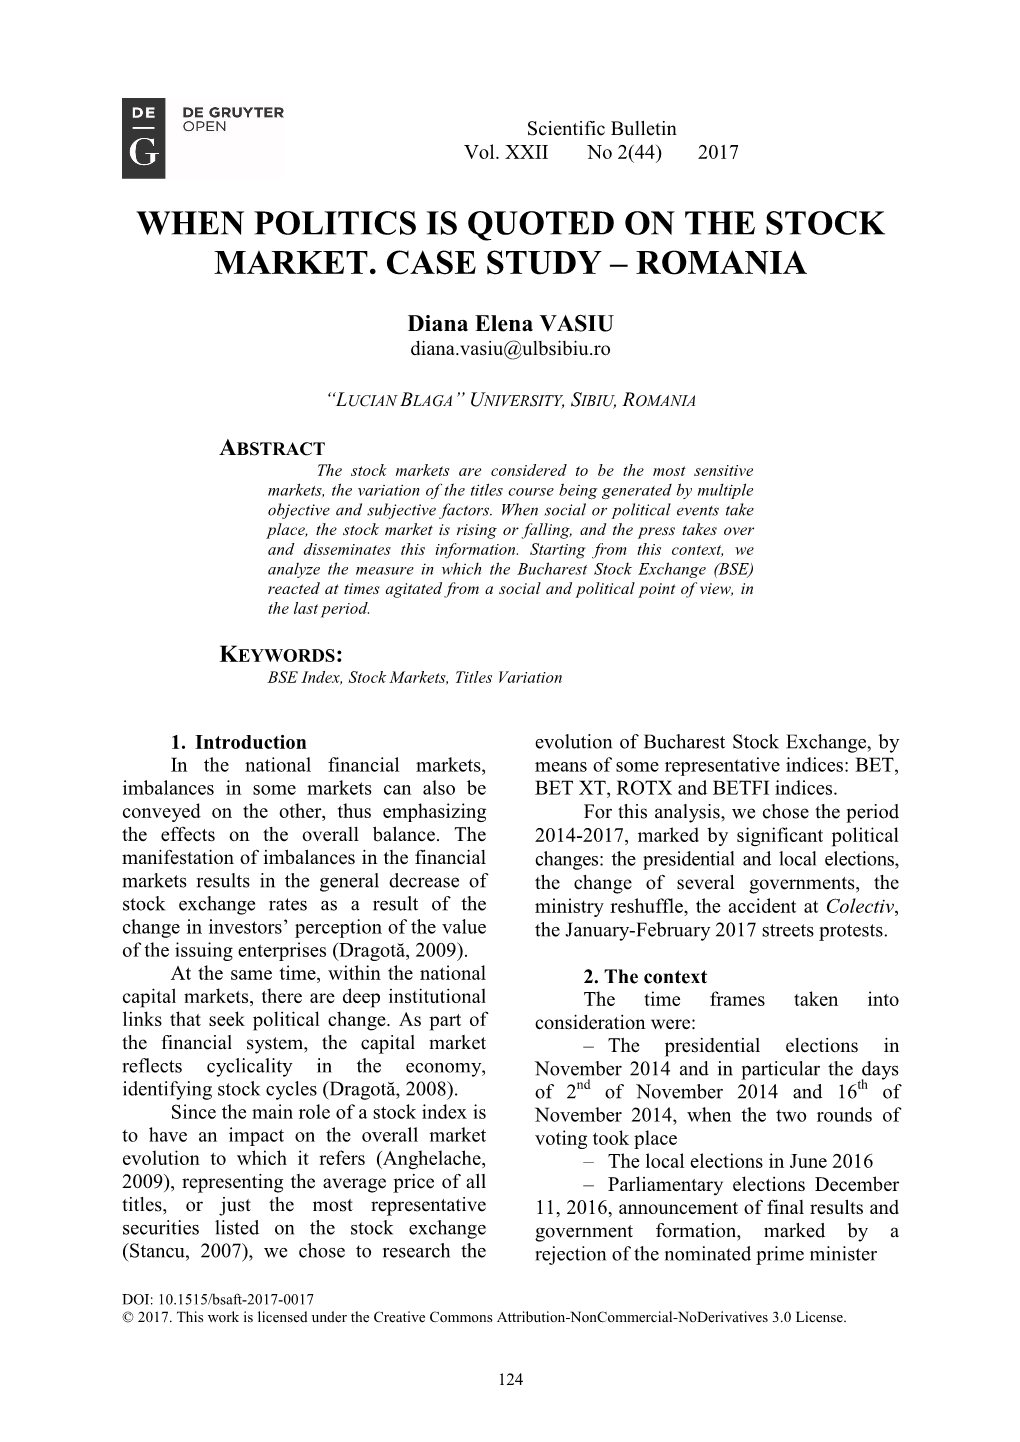 When Politics Is Quoted on the Stock Market. Case Study – Romania